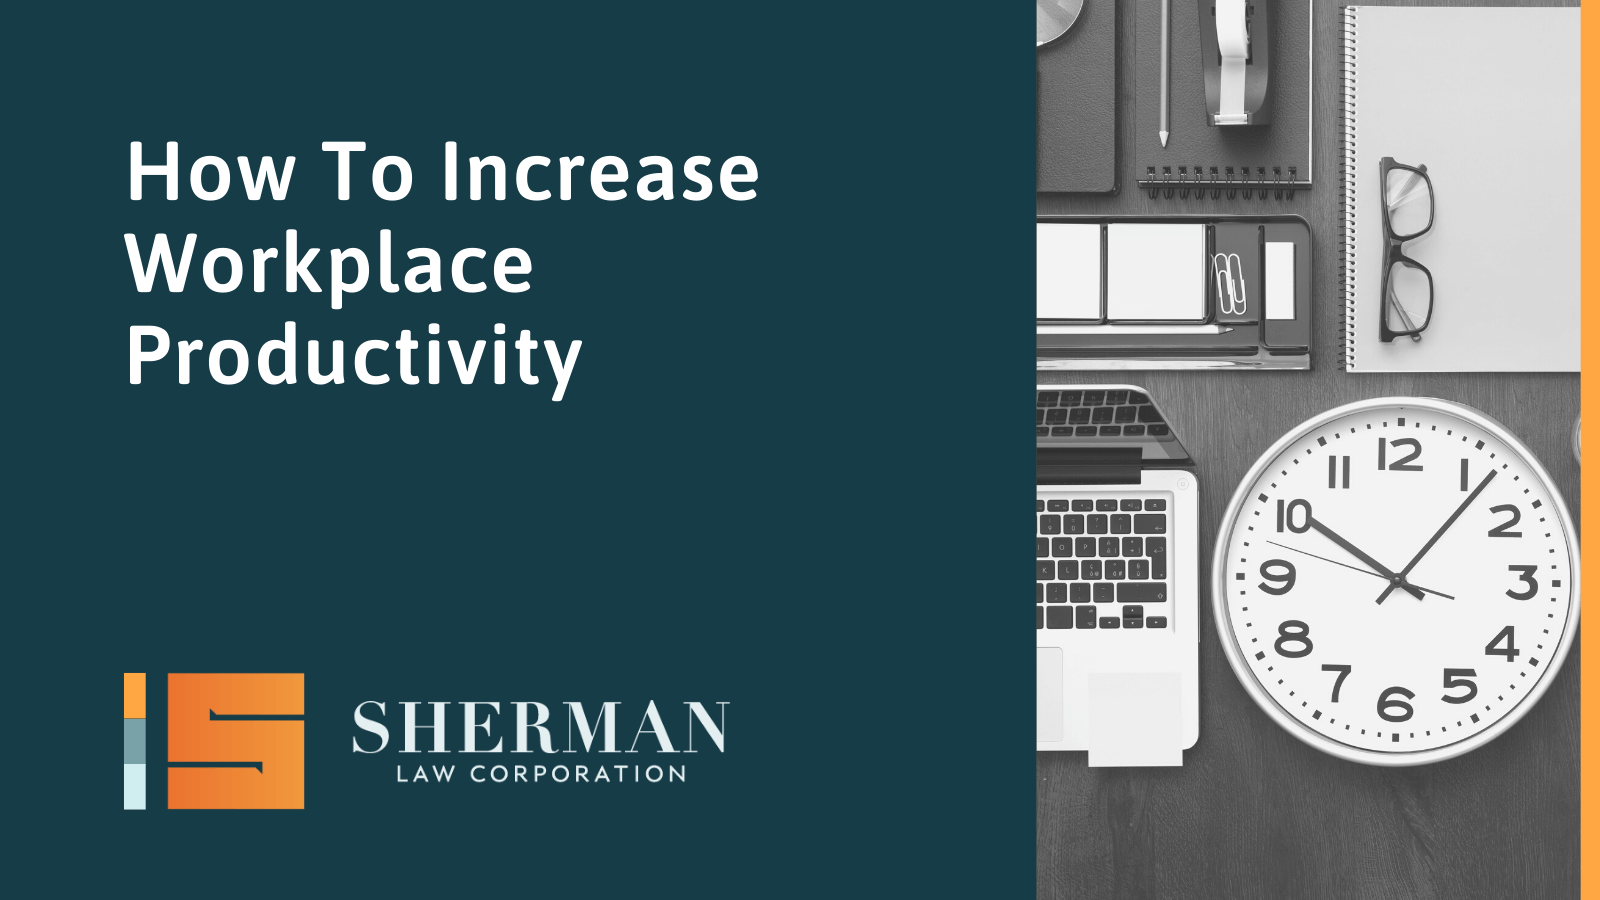 How To Increase Workplace Productivity- sherman law corporation